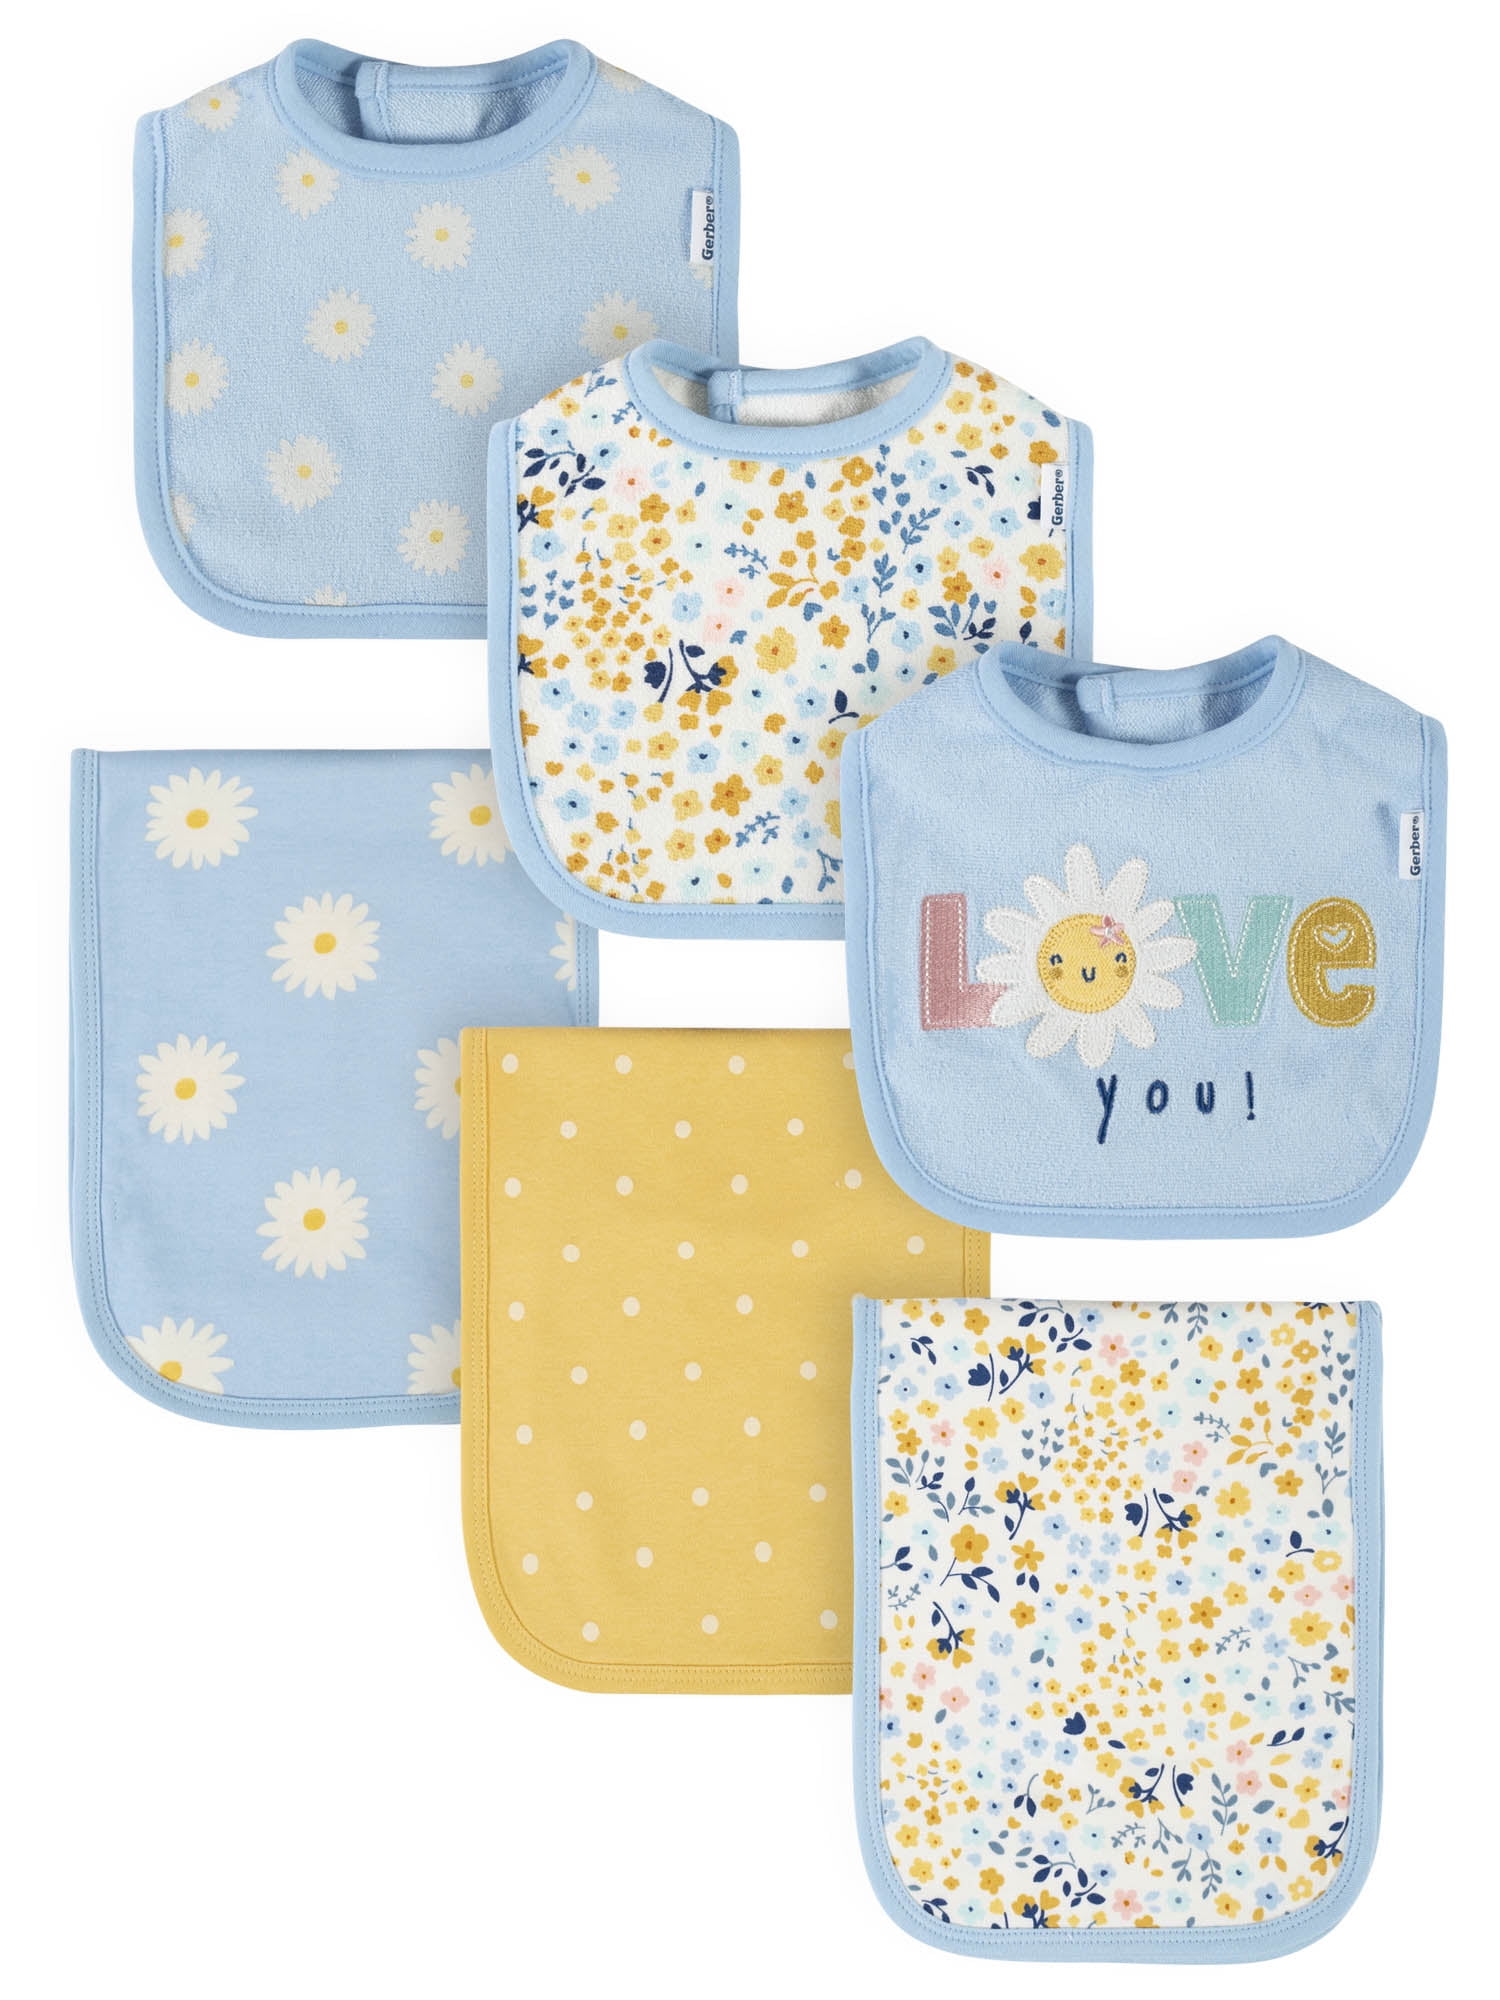 New Handmade Personalize Embroidered Cotton Flannel Boy Bib and Burp Cloth Set 